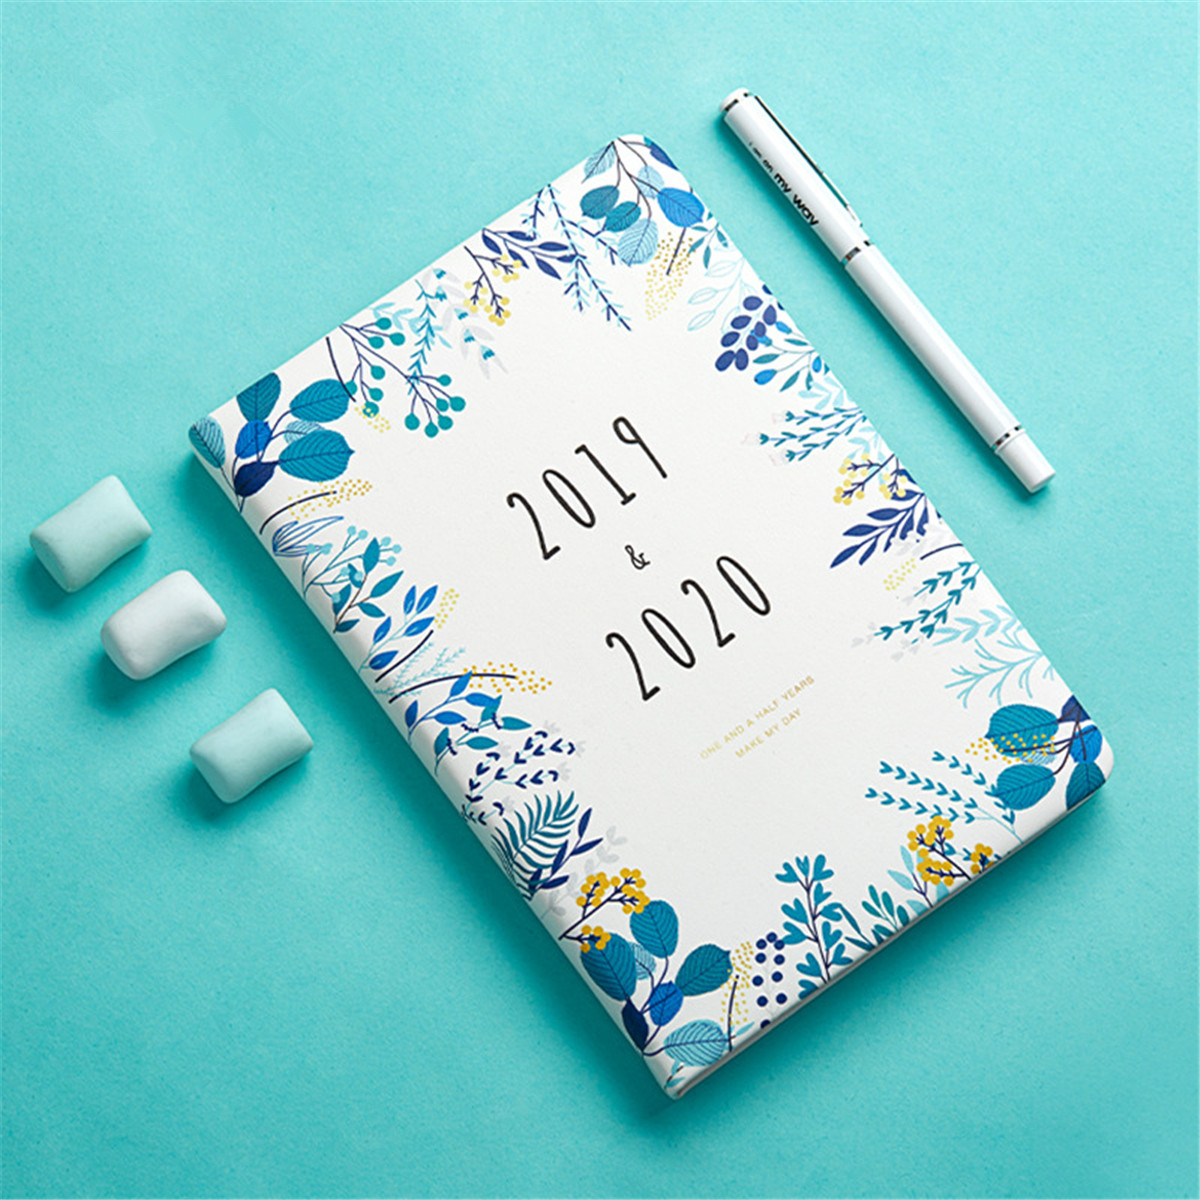 2019-2020-Weekly-Monthly-Agenda-Planner-Monthly-Weekly-Plan-Portable-Notebook-Cute-Diary-Flower-Sche-1530952-2